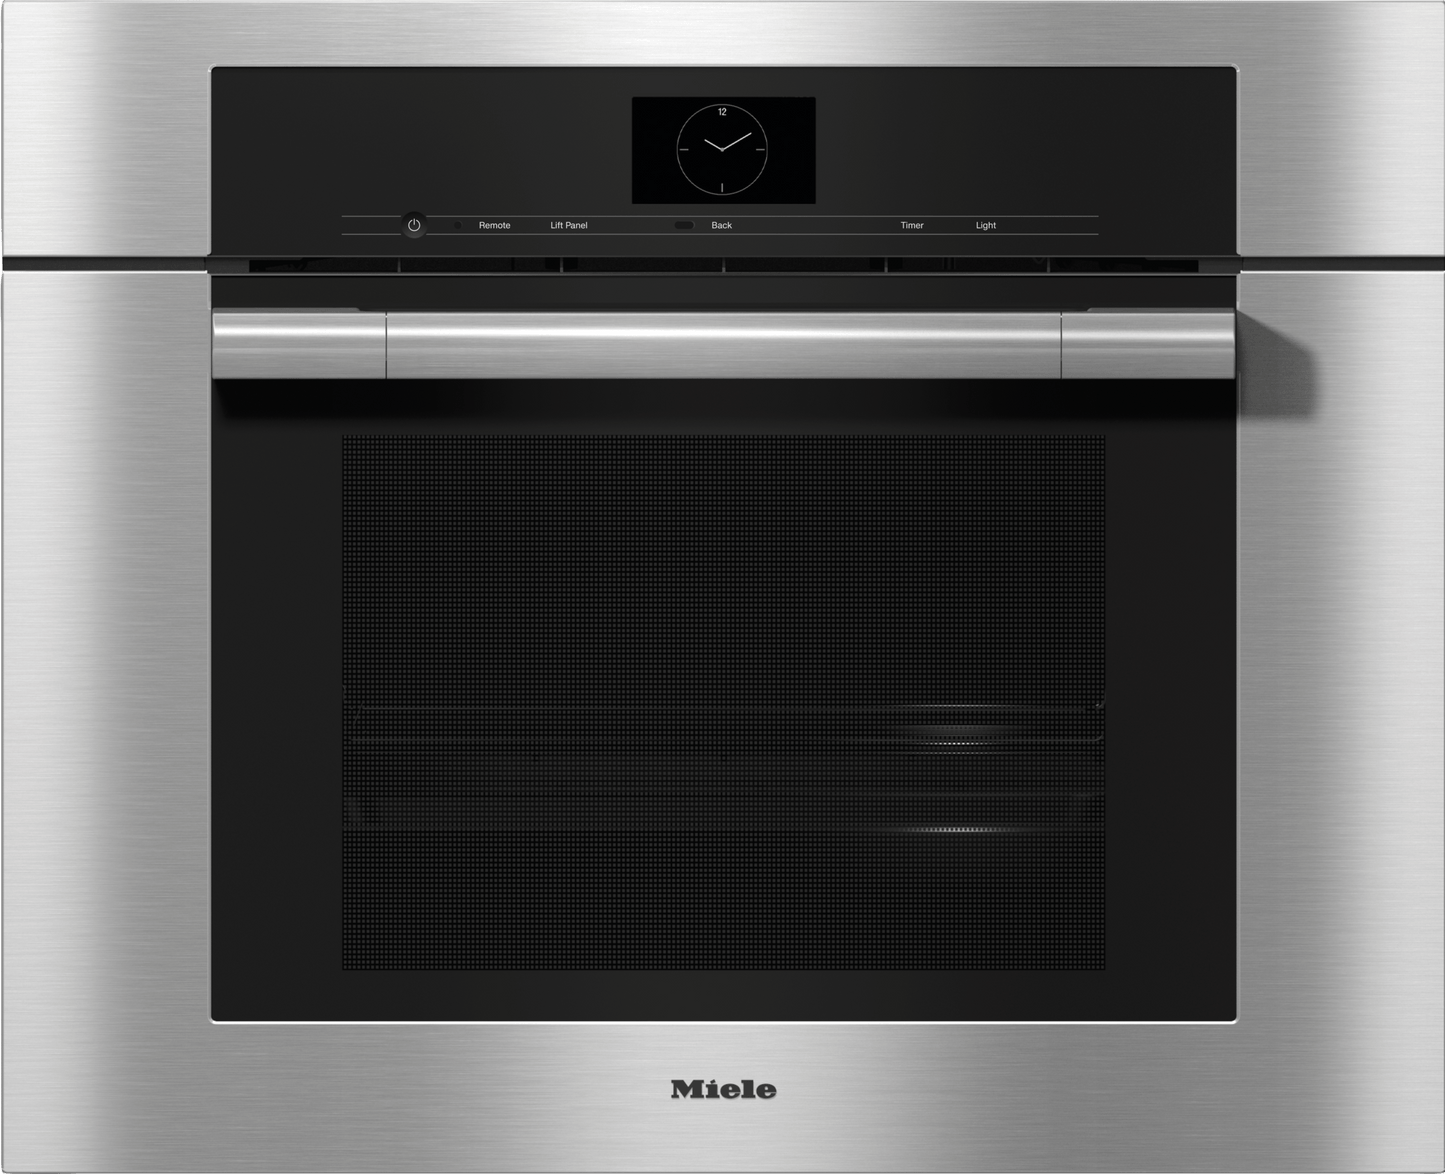 Miele DGC7585 STAINLESS STEEL  30" Combi-Steam Oven Xxl With Directwater Plus For Steam Cooking, Baking, Roasting With Roast Probe + Menu Cooking.